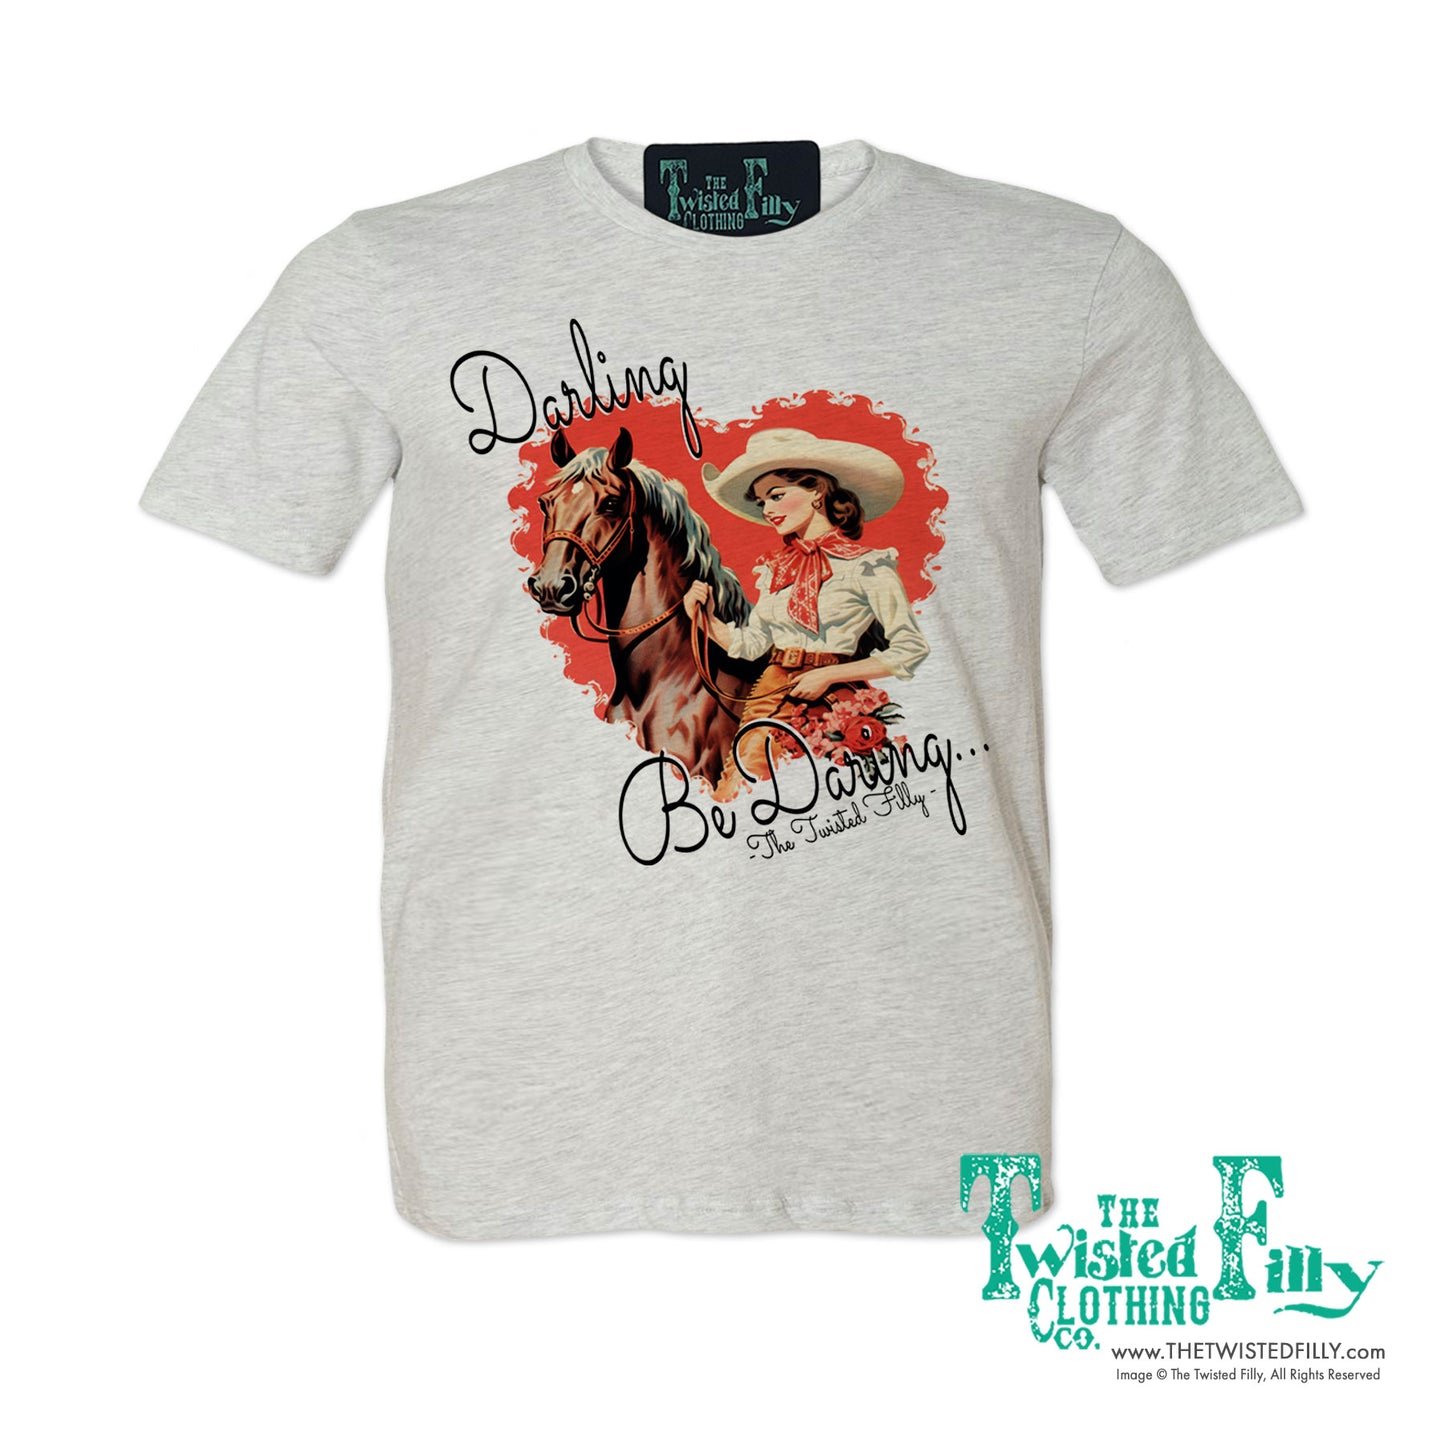 Darling Be Daring - S/S Adult Crew Neck Womens Tee - Assorted Colors